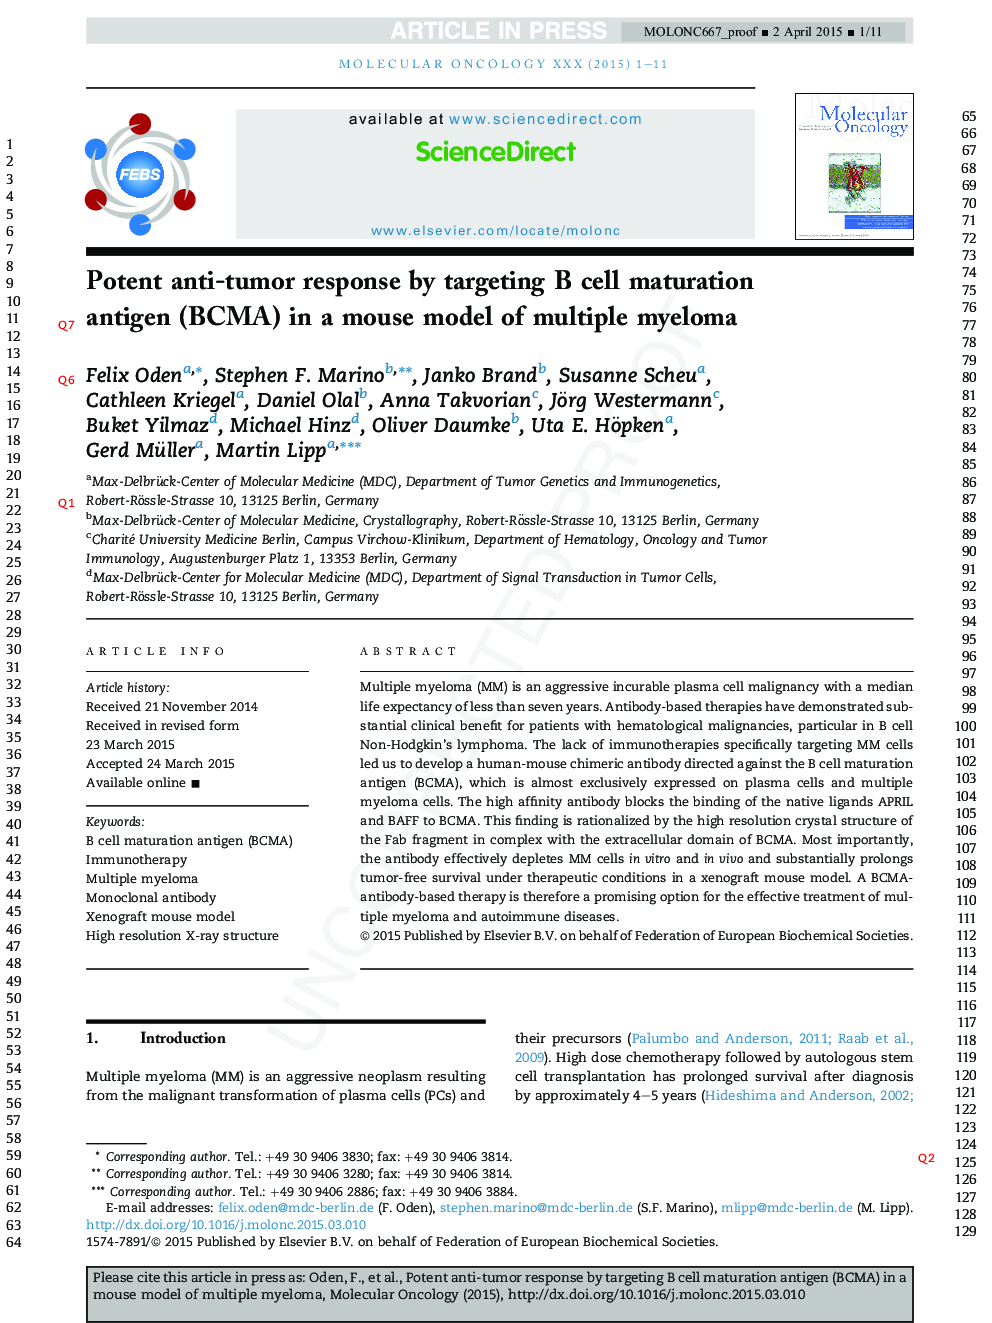 Potent anti-tumor response by targeting B cell maturation antigen (BCMA) in a mouse model of multiple myeloma